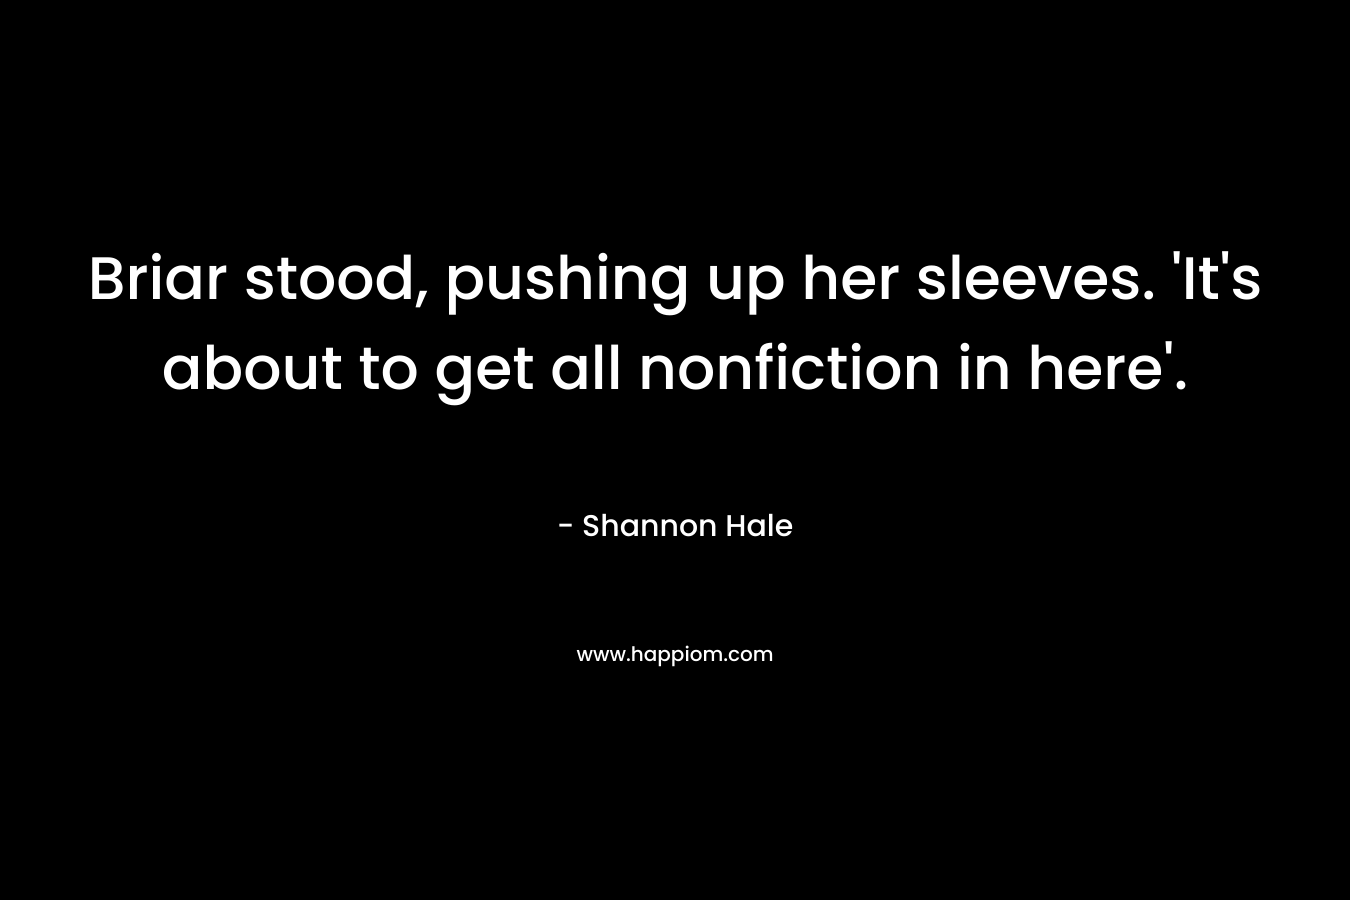 Briar stood, pushing up her sleeves. ‘It’s about to get all nonfiction in here’. – Shannon Hale